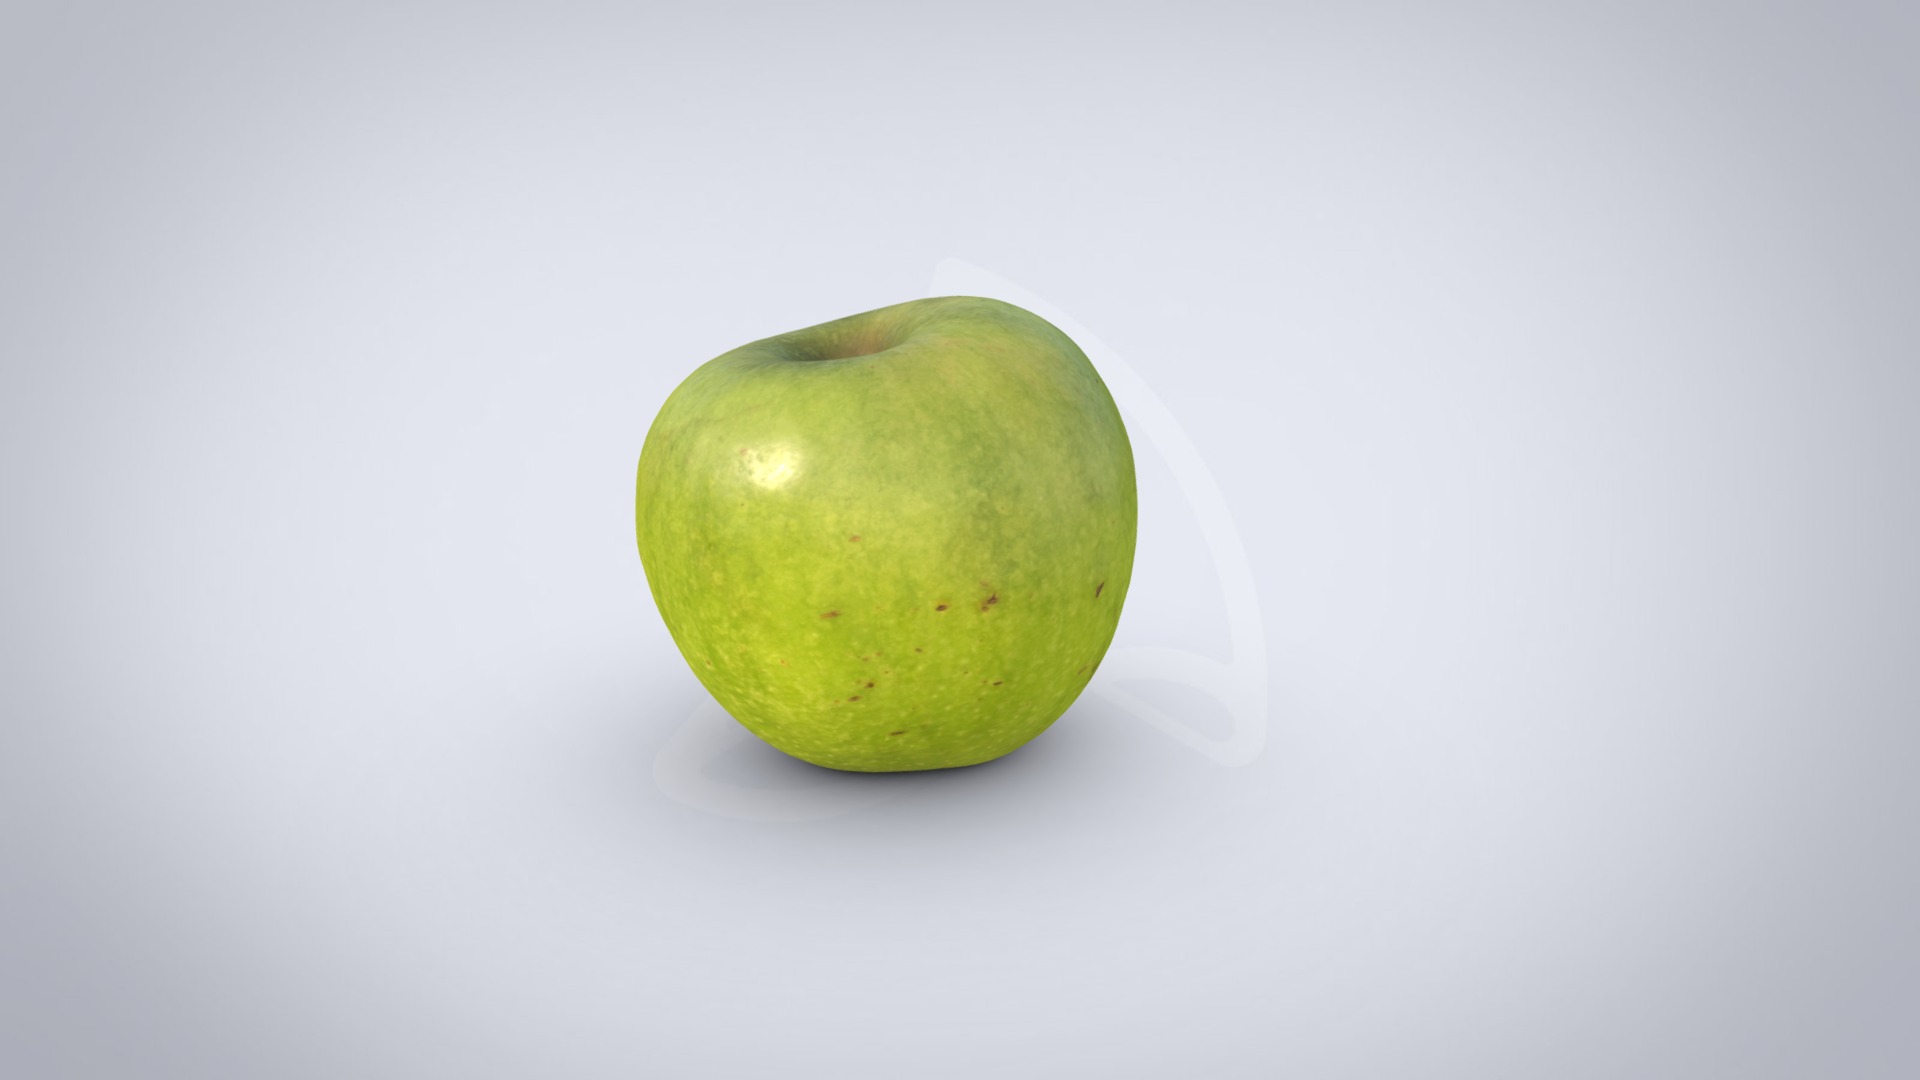 3D model Granny Smith apple - This is a 3D model of the Granny Smith apple. The 3D model is about a green apple on a white surface.